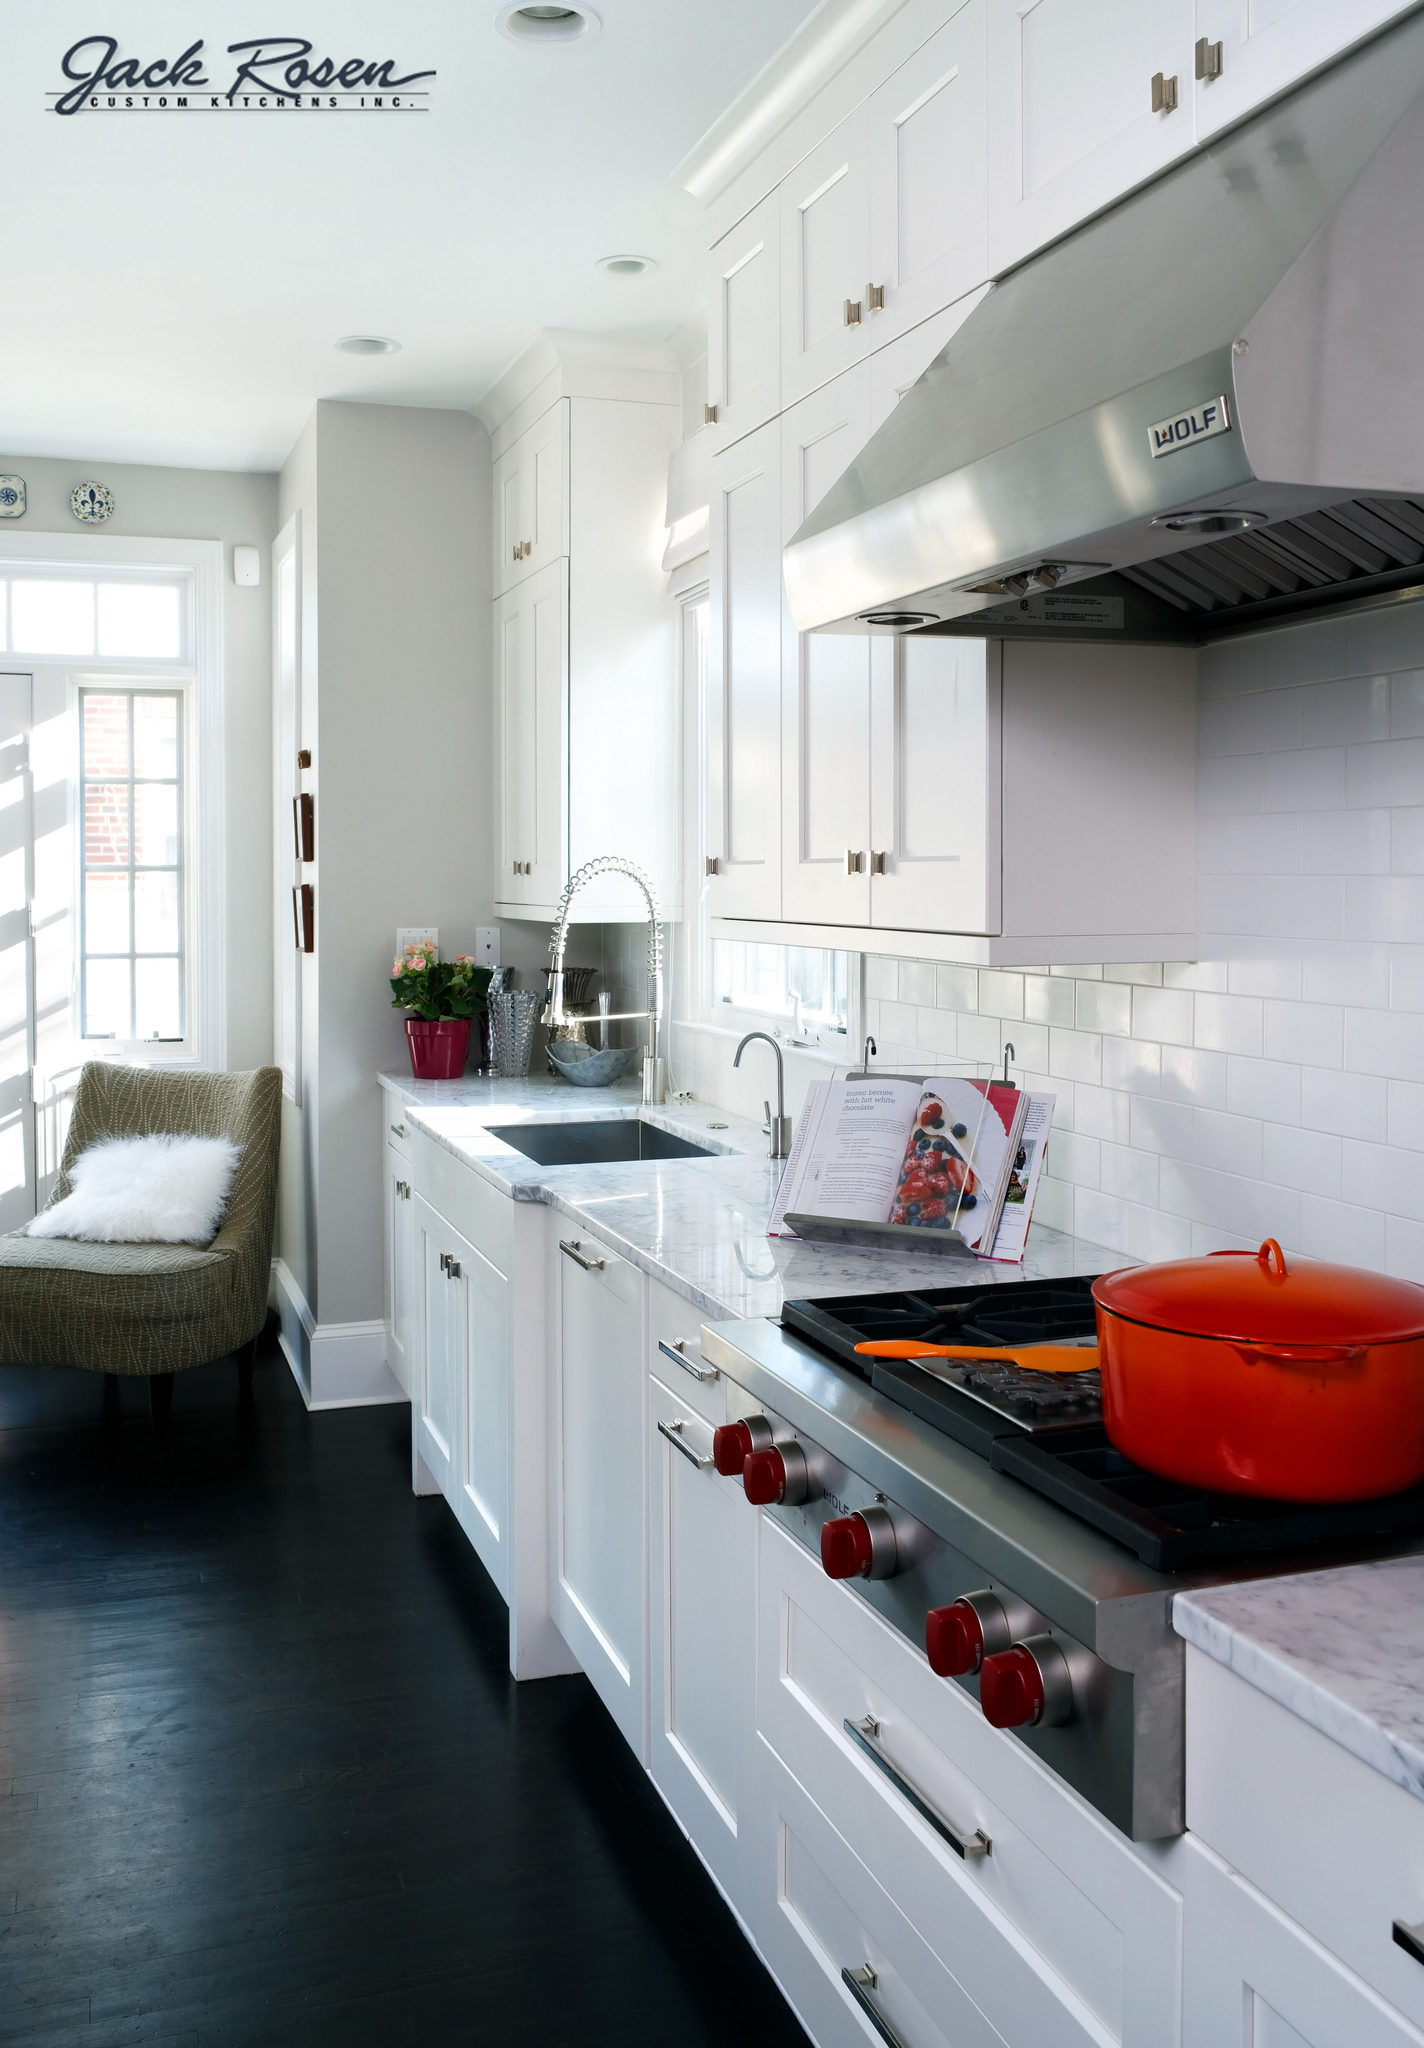 A high contrast white kitchen